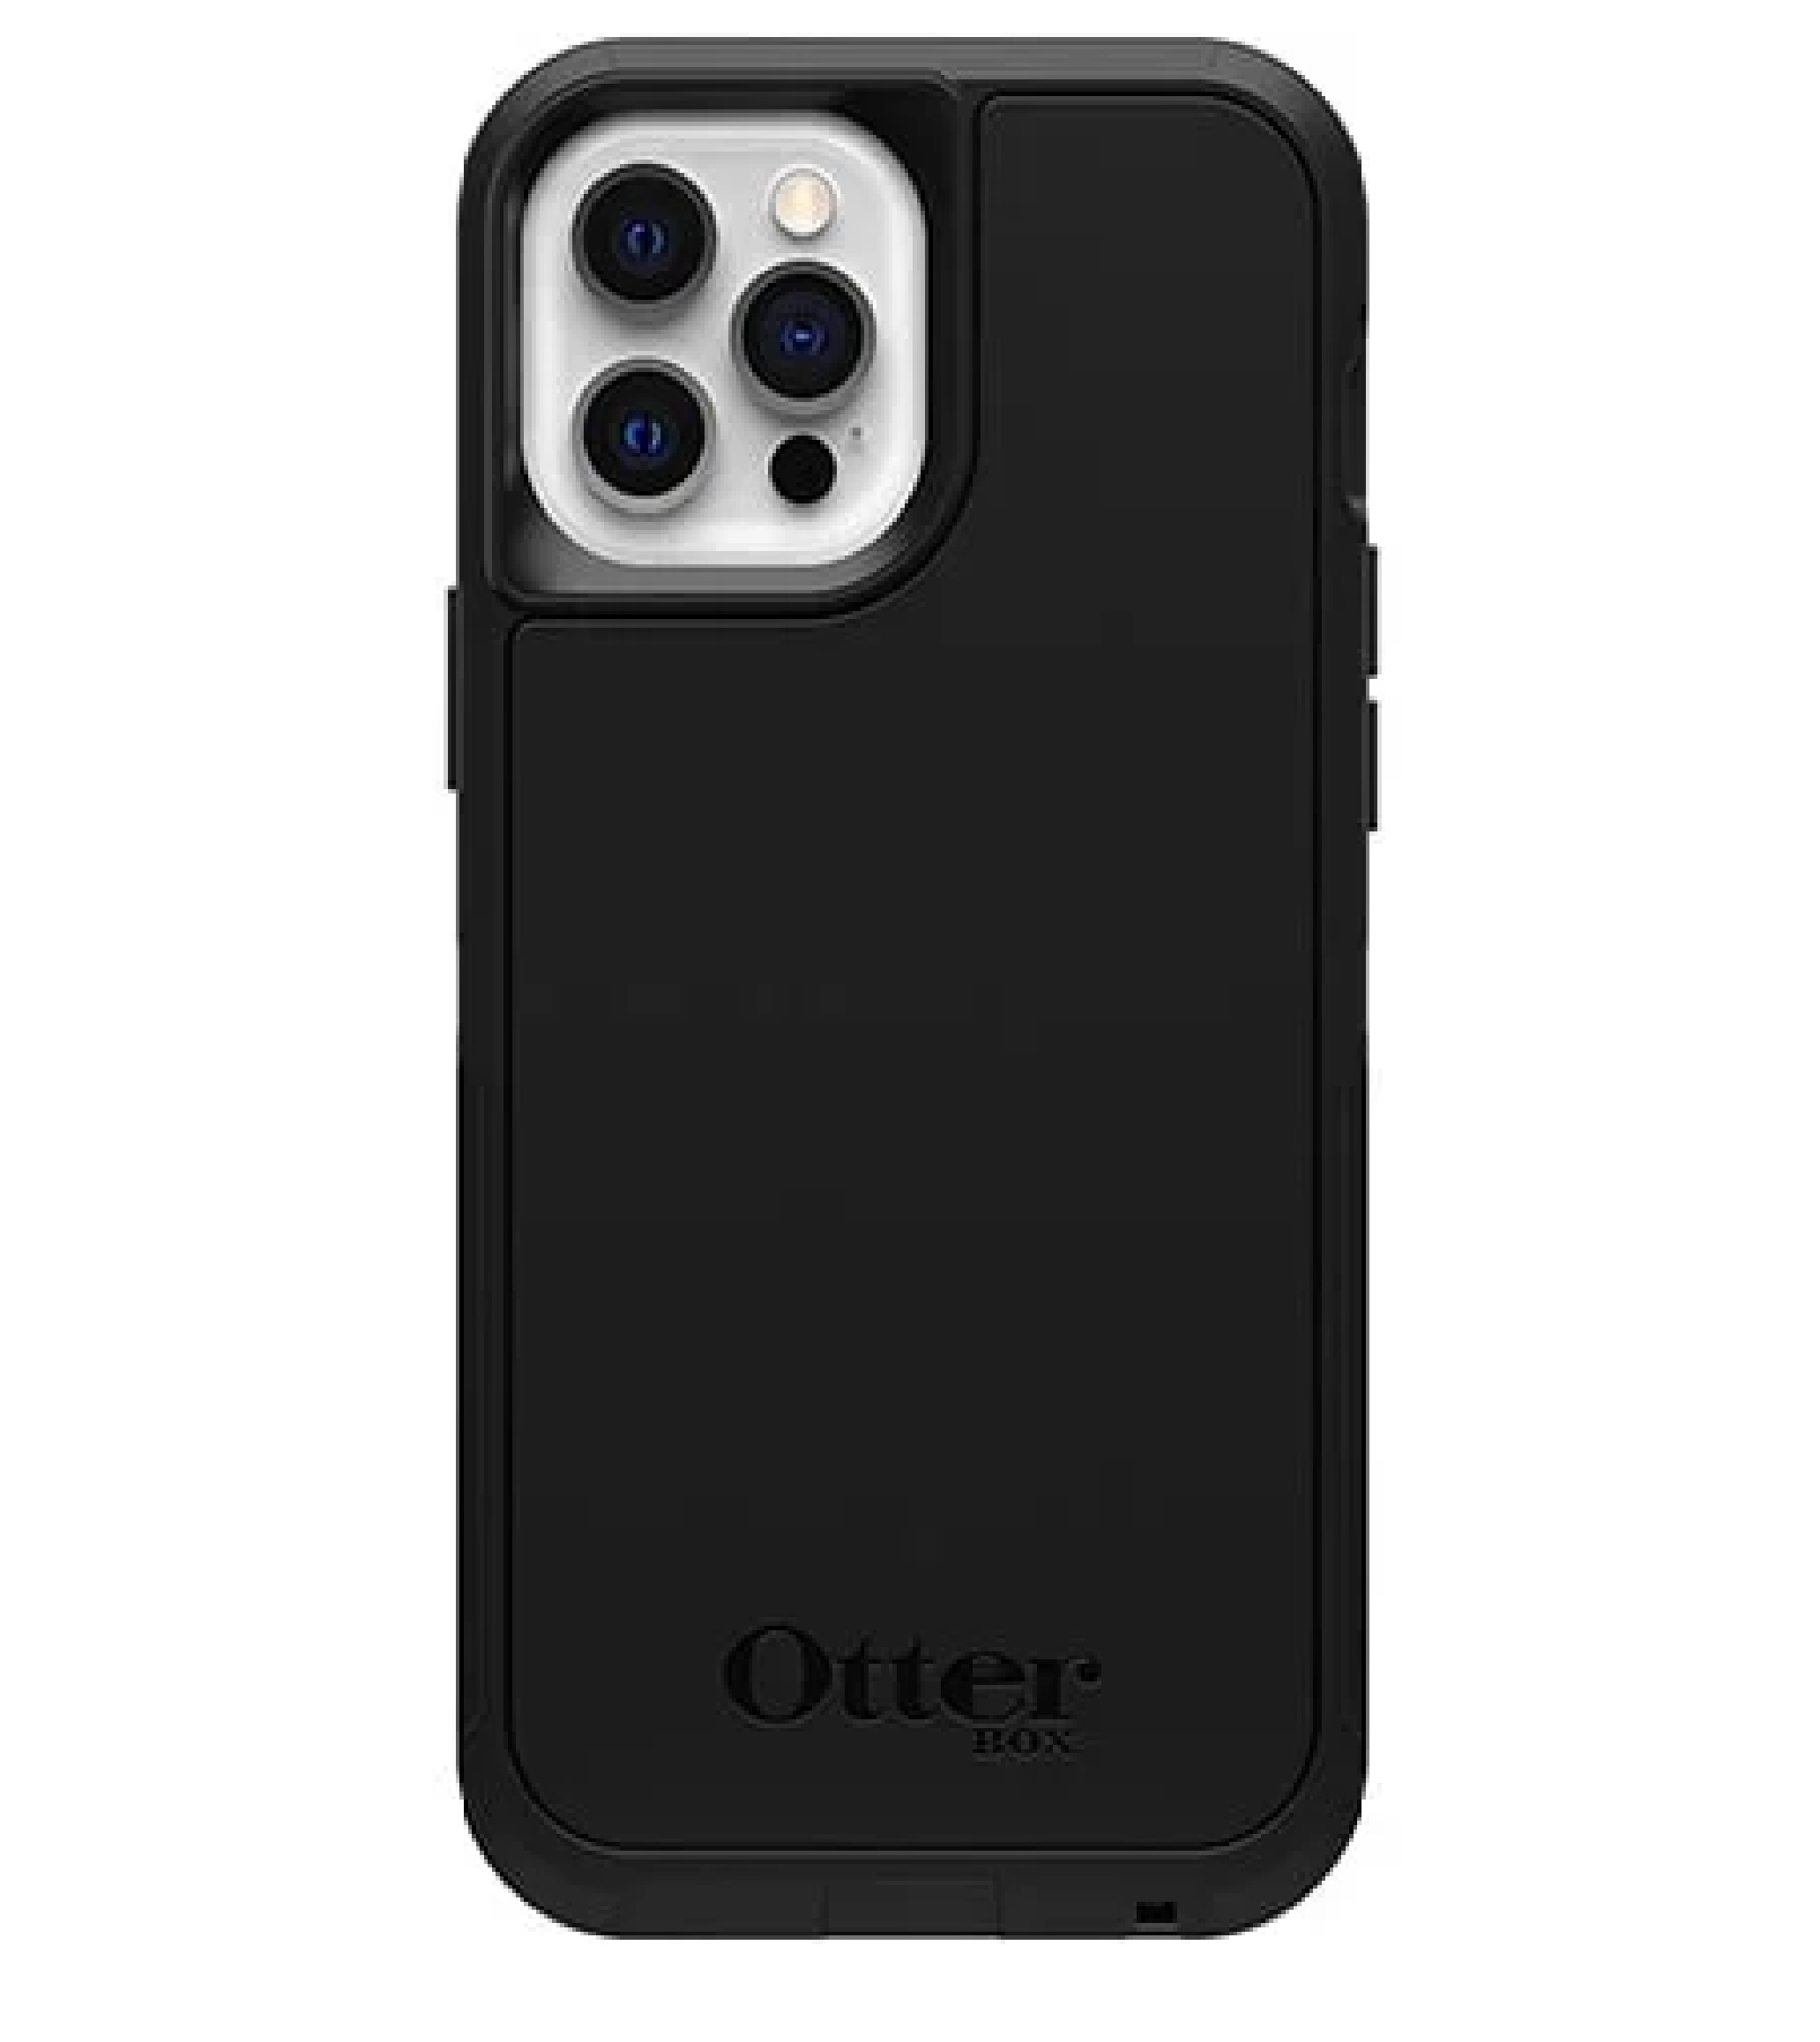 Otterbox Apple iPhone 12 Pro Max Defender Series XT Case with MagSafe - Black (77-80947), Wireless charging compatible, Port protection, Thin design